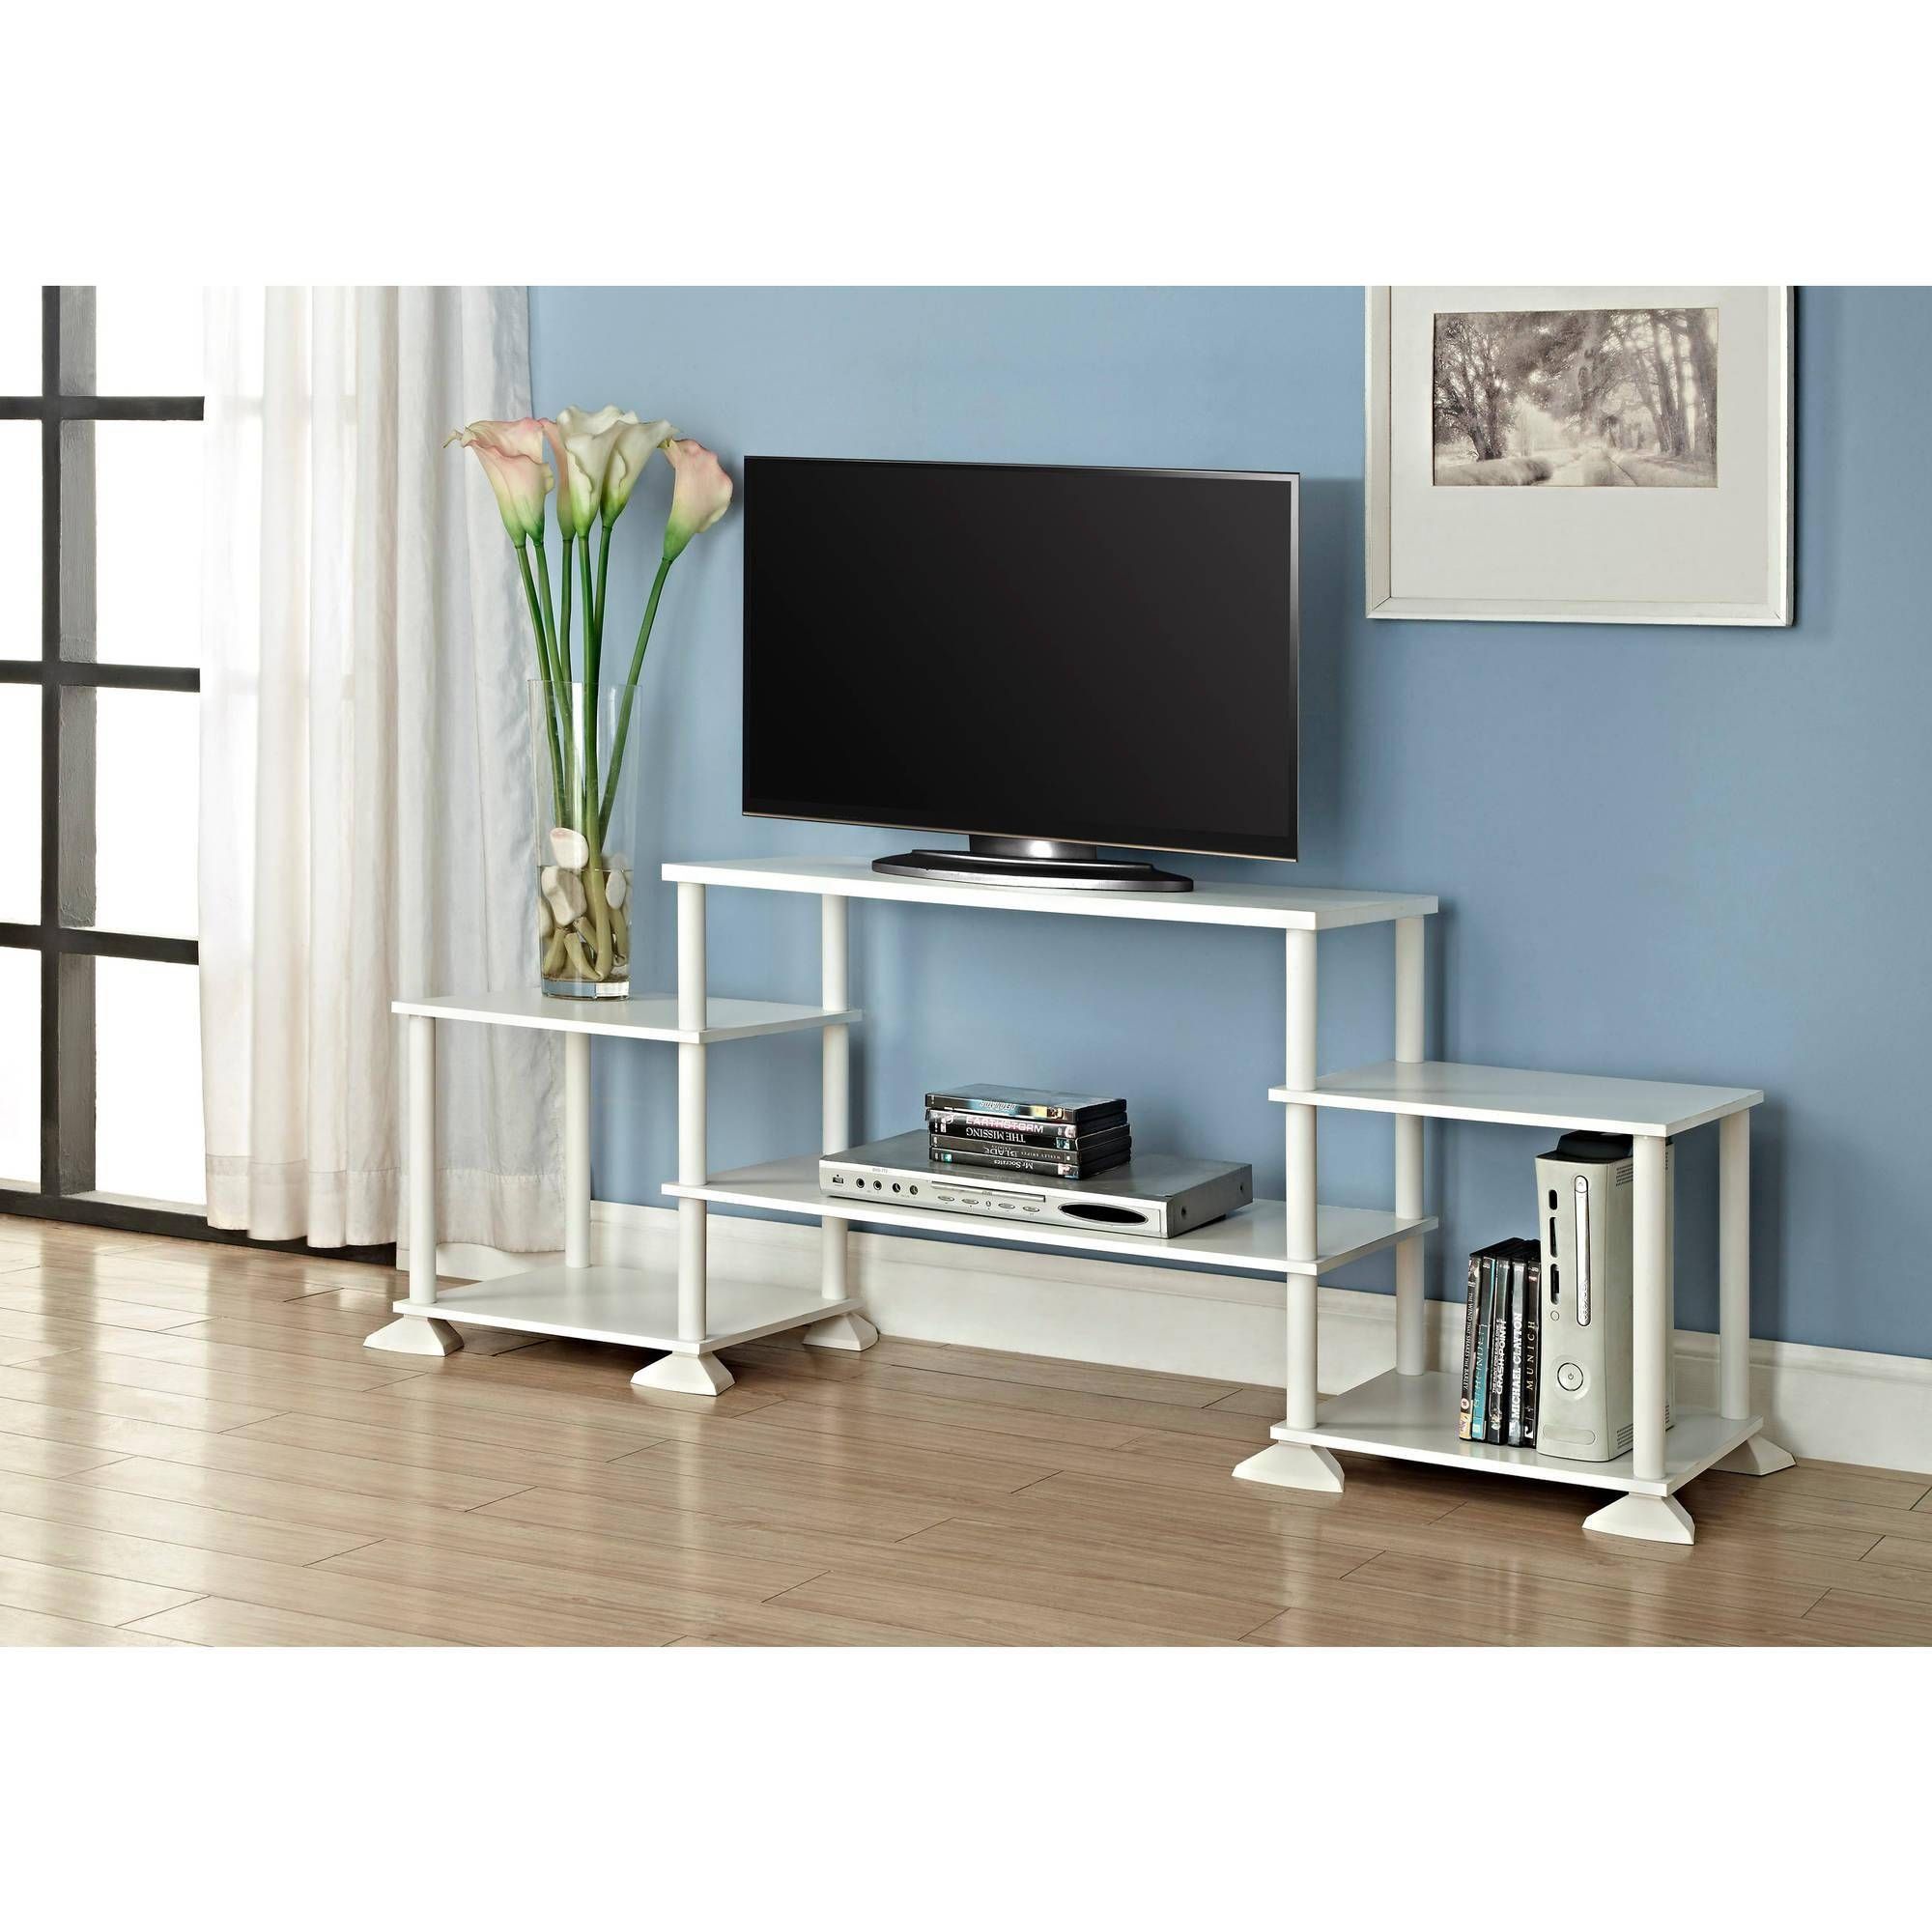 Great White Tv Stands For Flat Screens 89 About Remodel Modern Regarding White Tv Stands For Flat Screens (View 6 of 15)